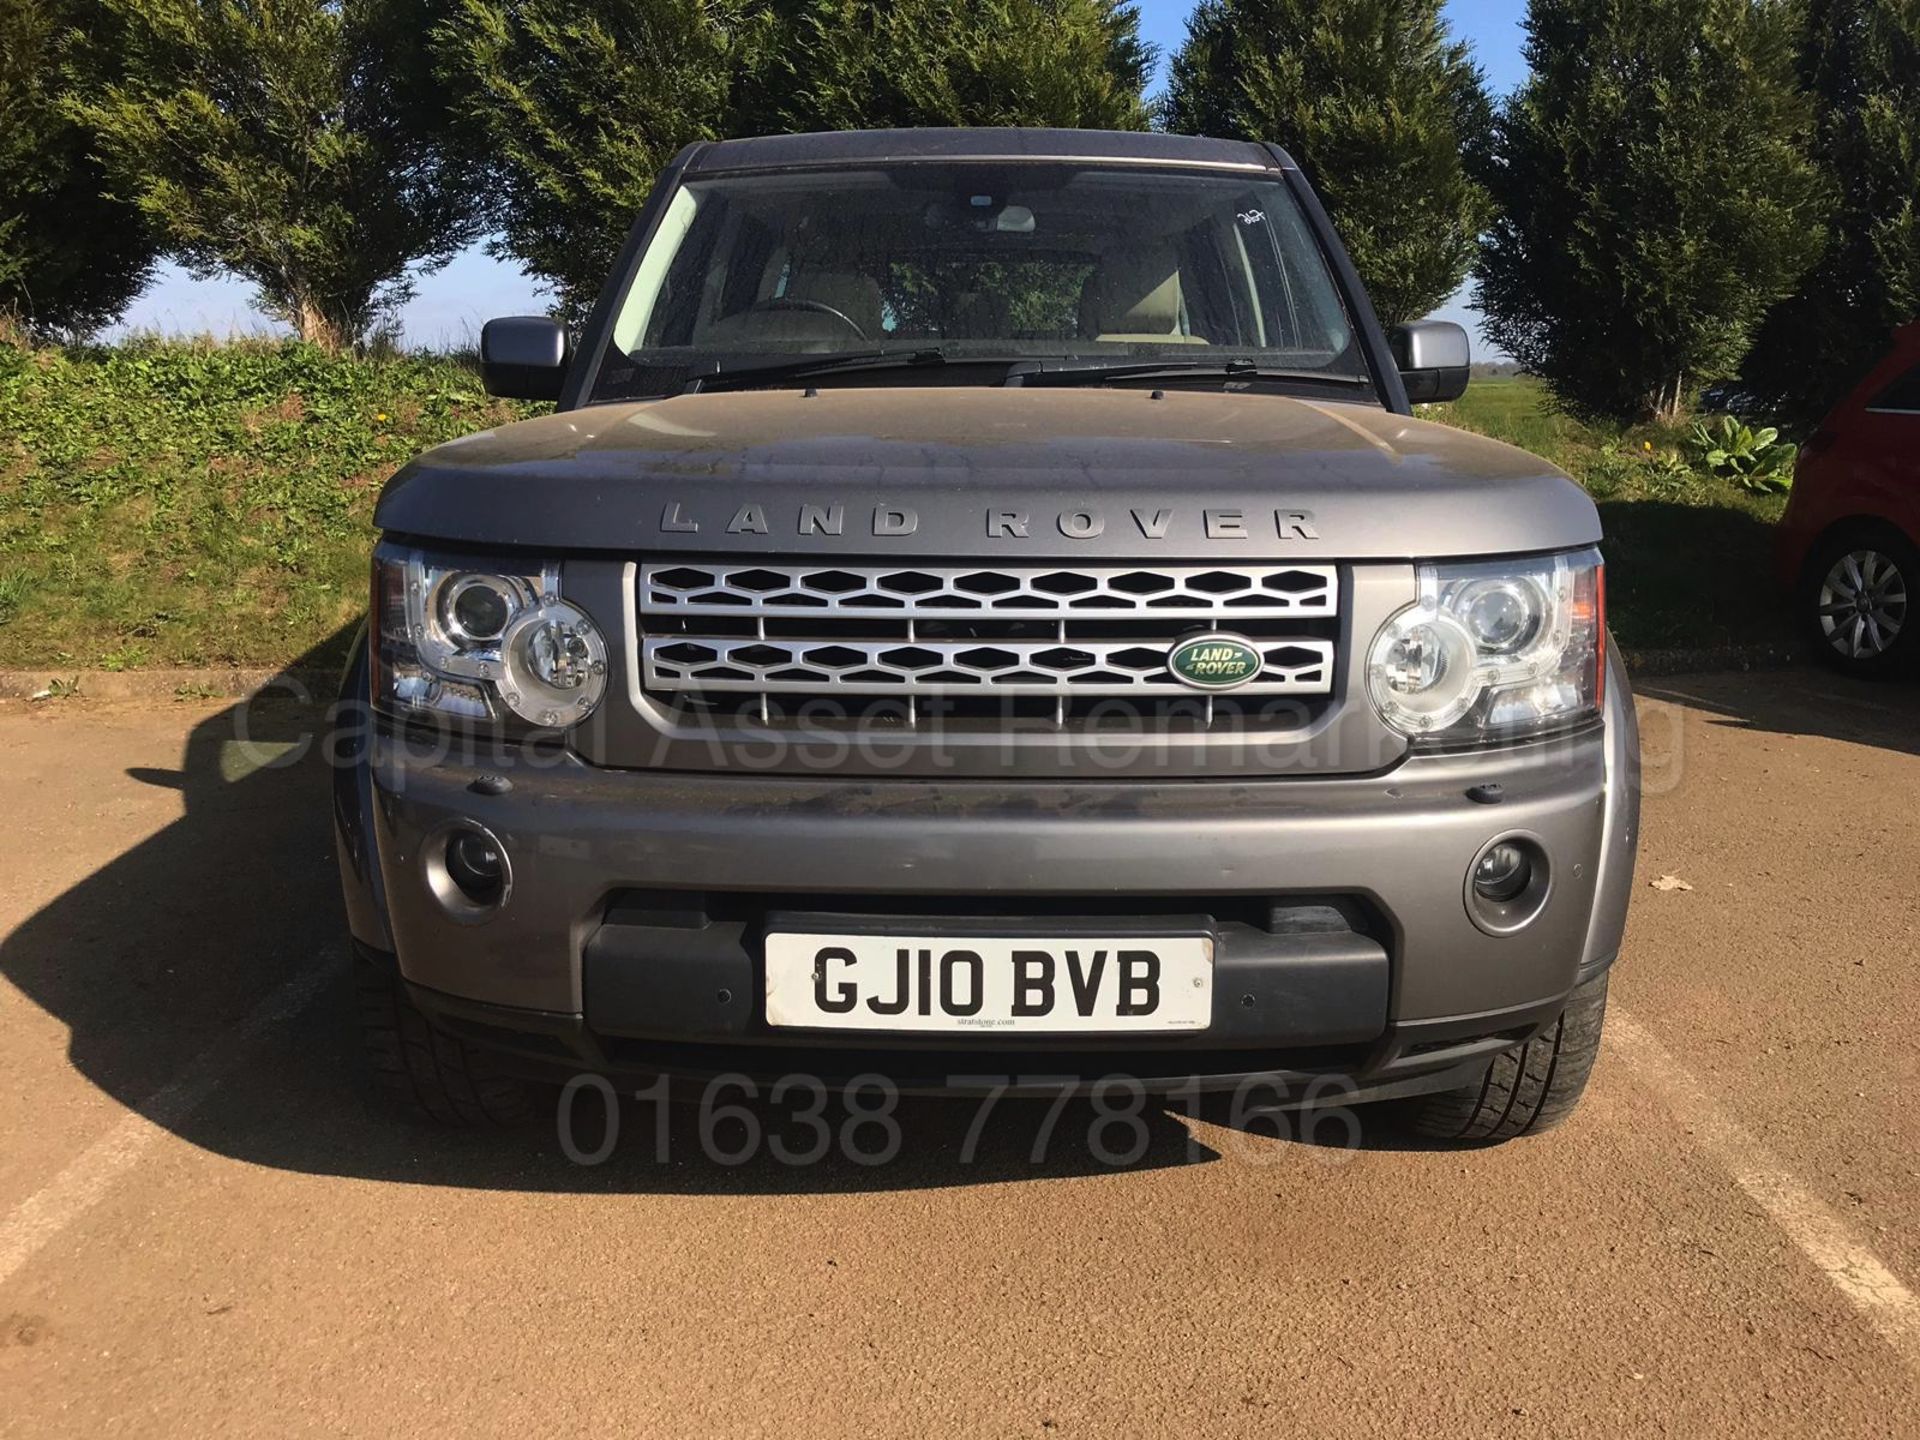 (ON SALE) LAND ROVER DISCOVERY 4 *HSE* SUV (2010) '3.0 TDV6 - 245 BHP - AUTO' *LEATHER - SAT NAV* - Image 3 of 24